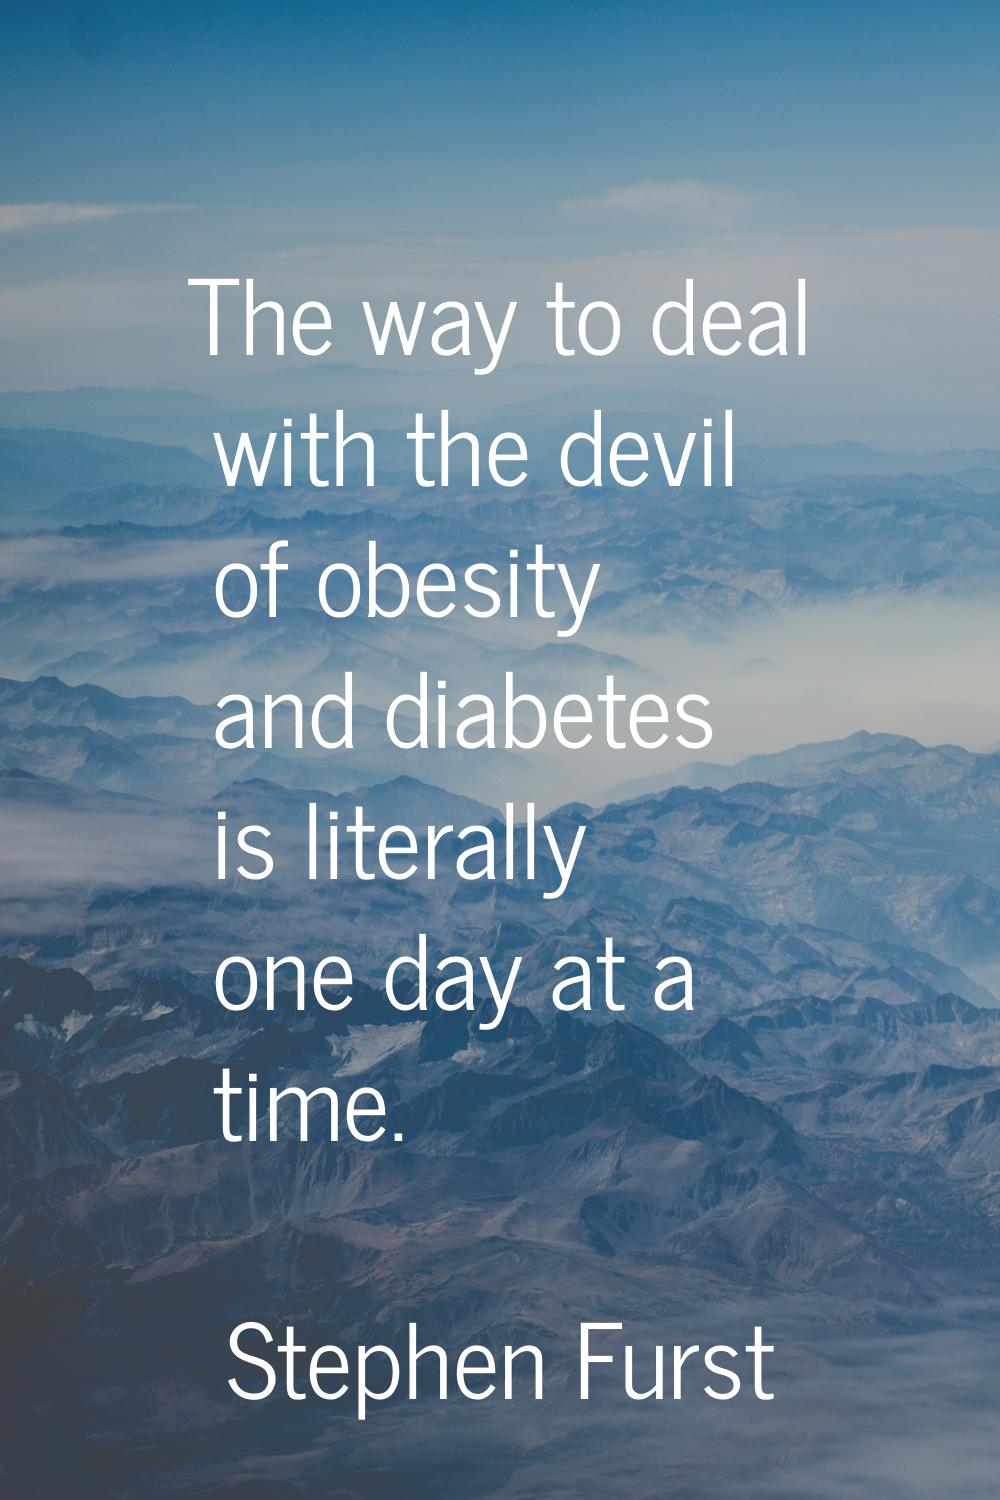 The way to deal with the devil of obesity and diabetes is literally one day at a time.